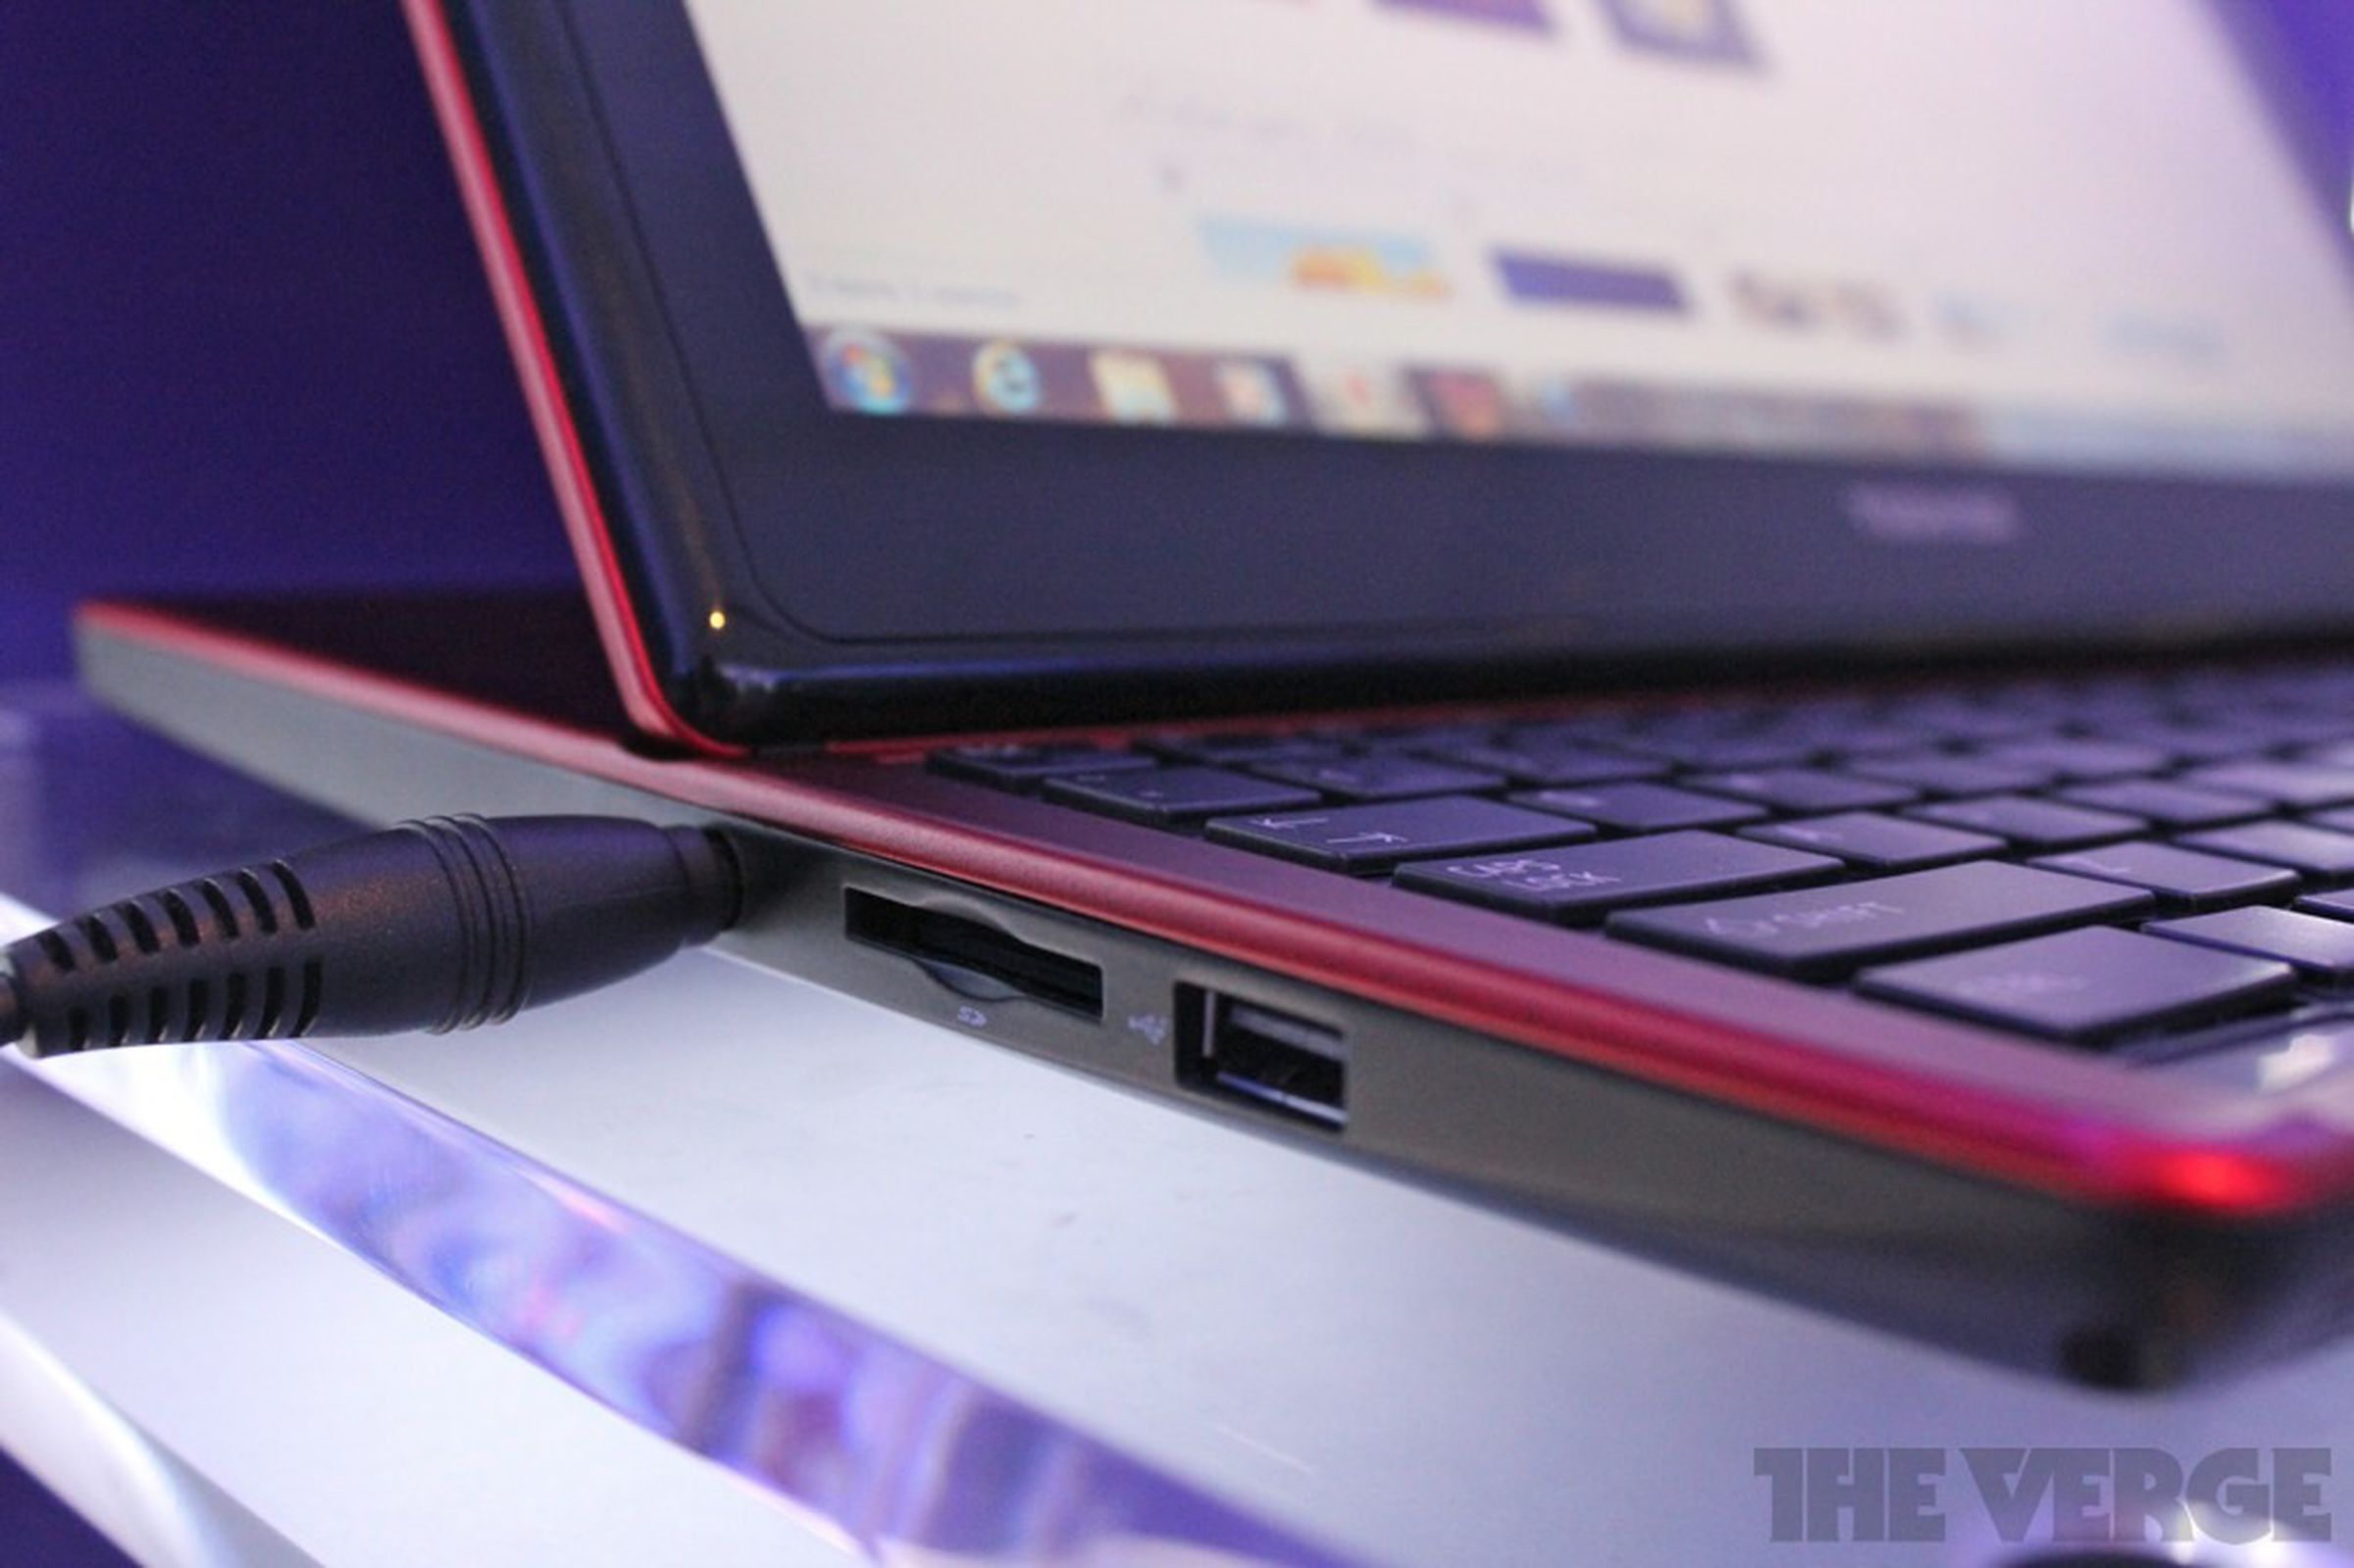 Toshiba Portege M930 hands-on pictures 